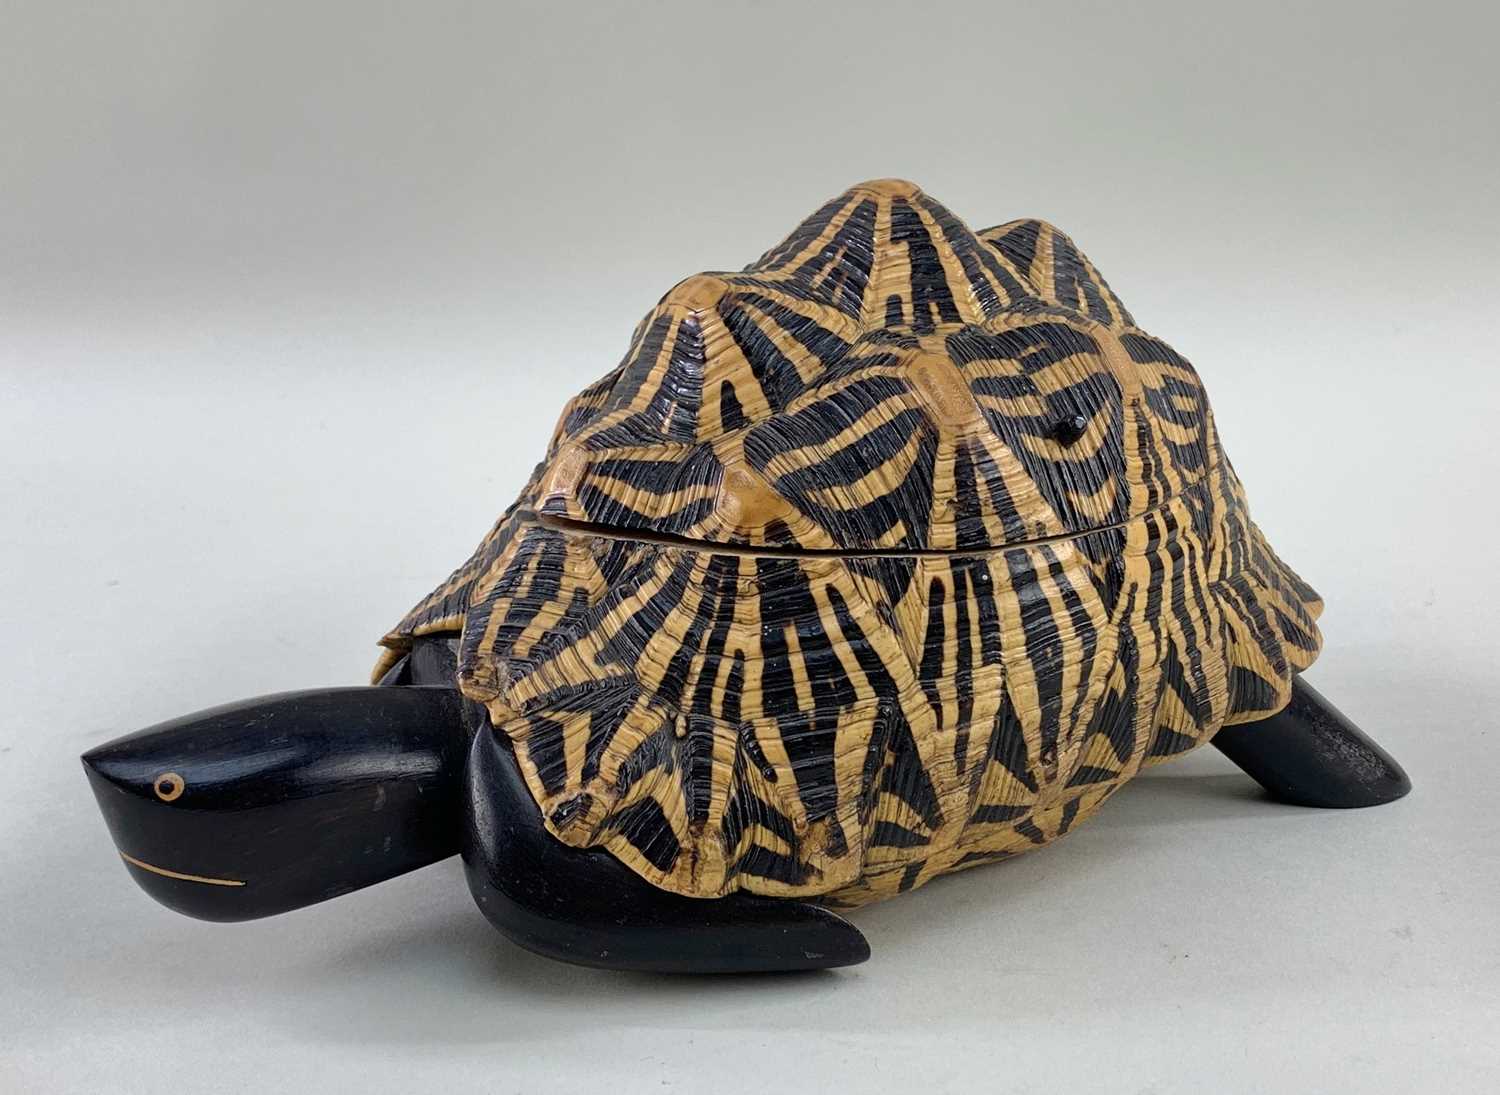 INDIAN STAR TORTOISE JEWELLERY BOX, early 20th Century, the hinged carapace opening to reveal a